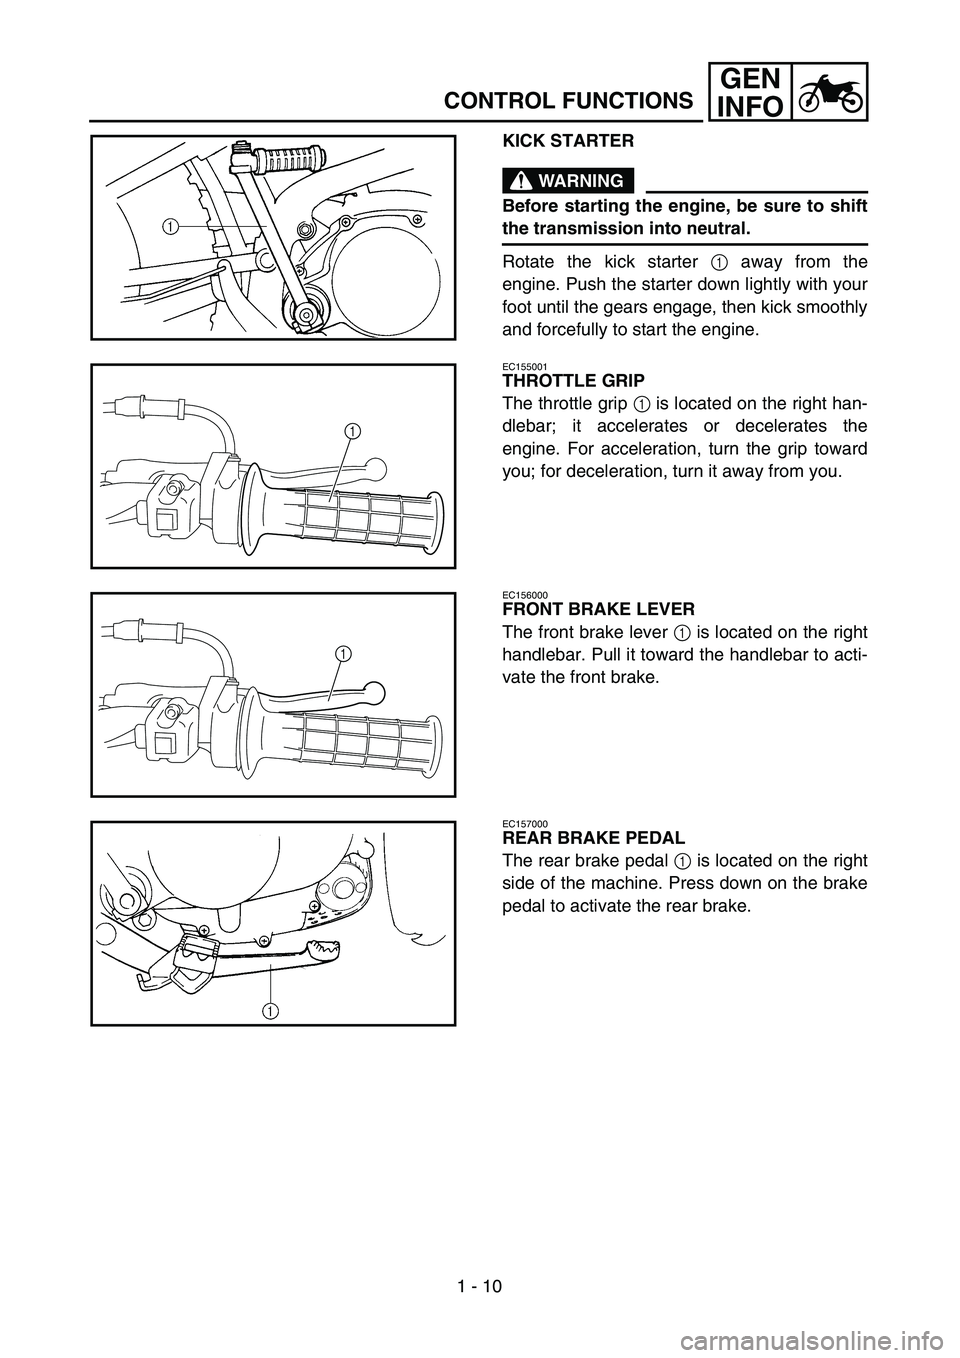 YAMAHA TTR90 2004 Service Manual 1 - 10
GEN
INFO
CONTROL FUNCTIONS
KICK STARTER
WARNING
Before starting the engine, be sure to shift
the transmission into neutral.
Rotate the kick starter 1 away from the
engine. Push the starter down